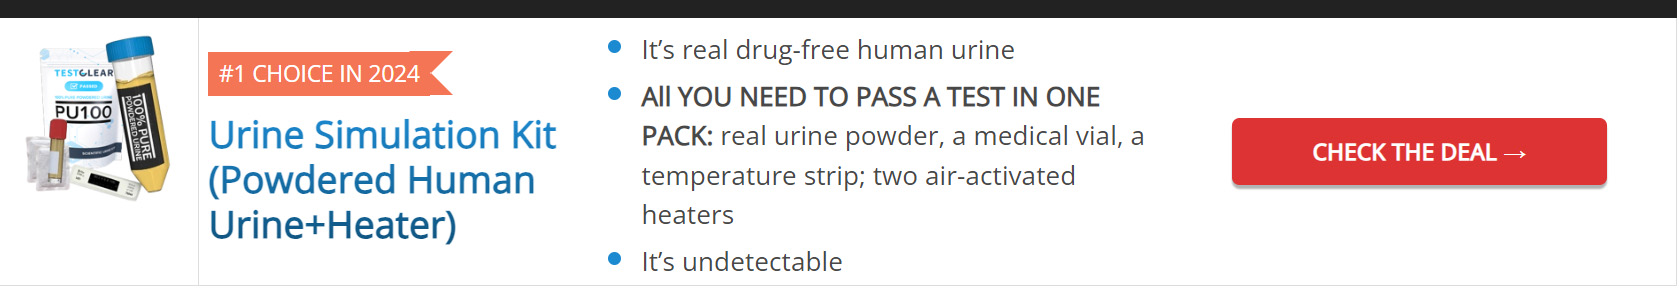 Synthetic Urine: A Detailed Guide